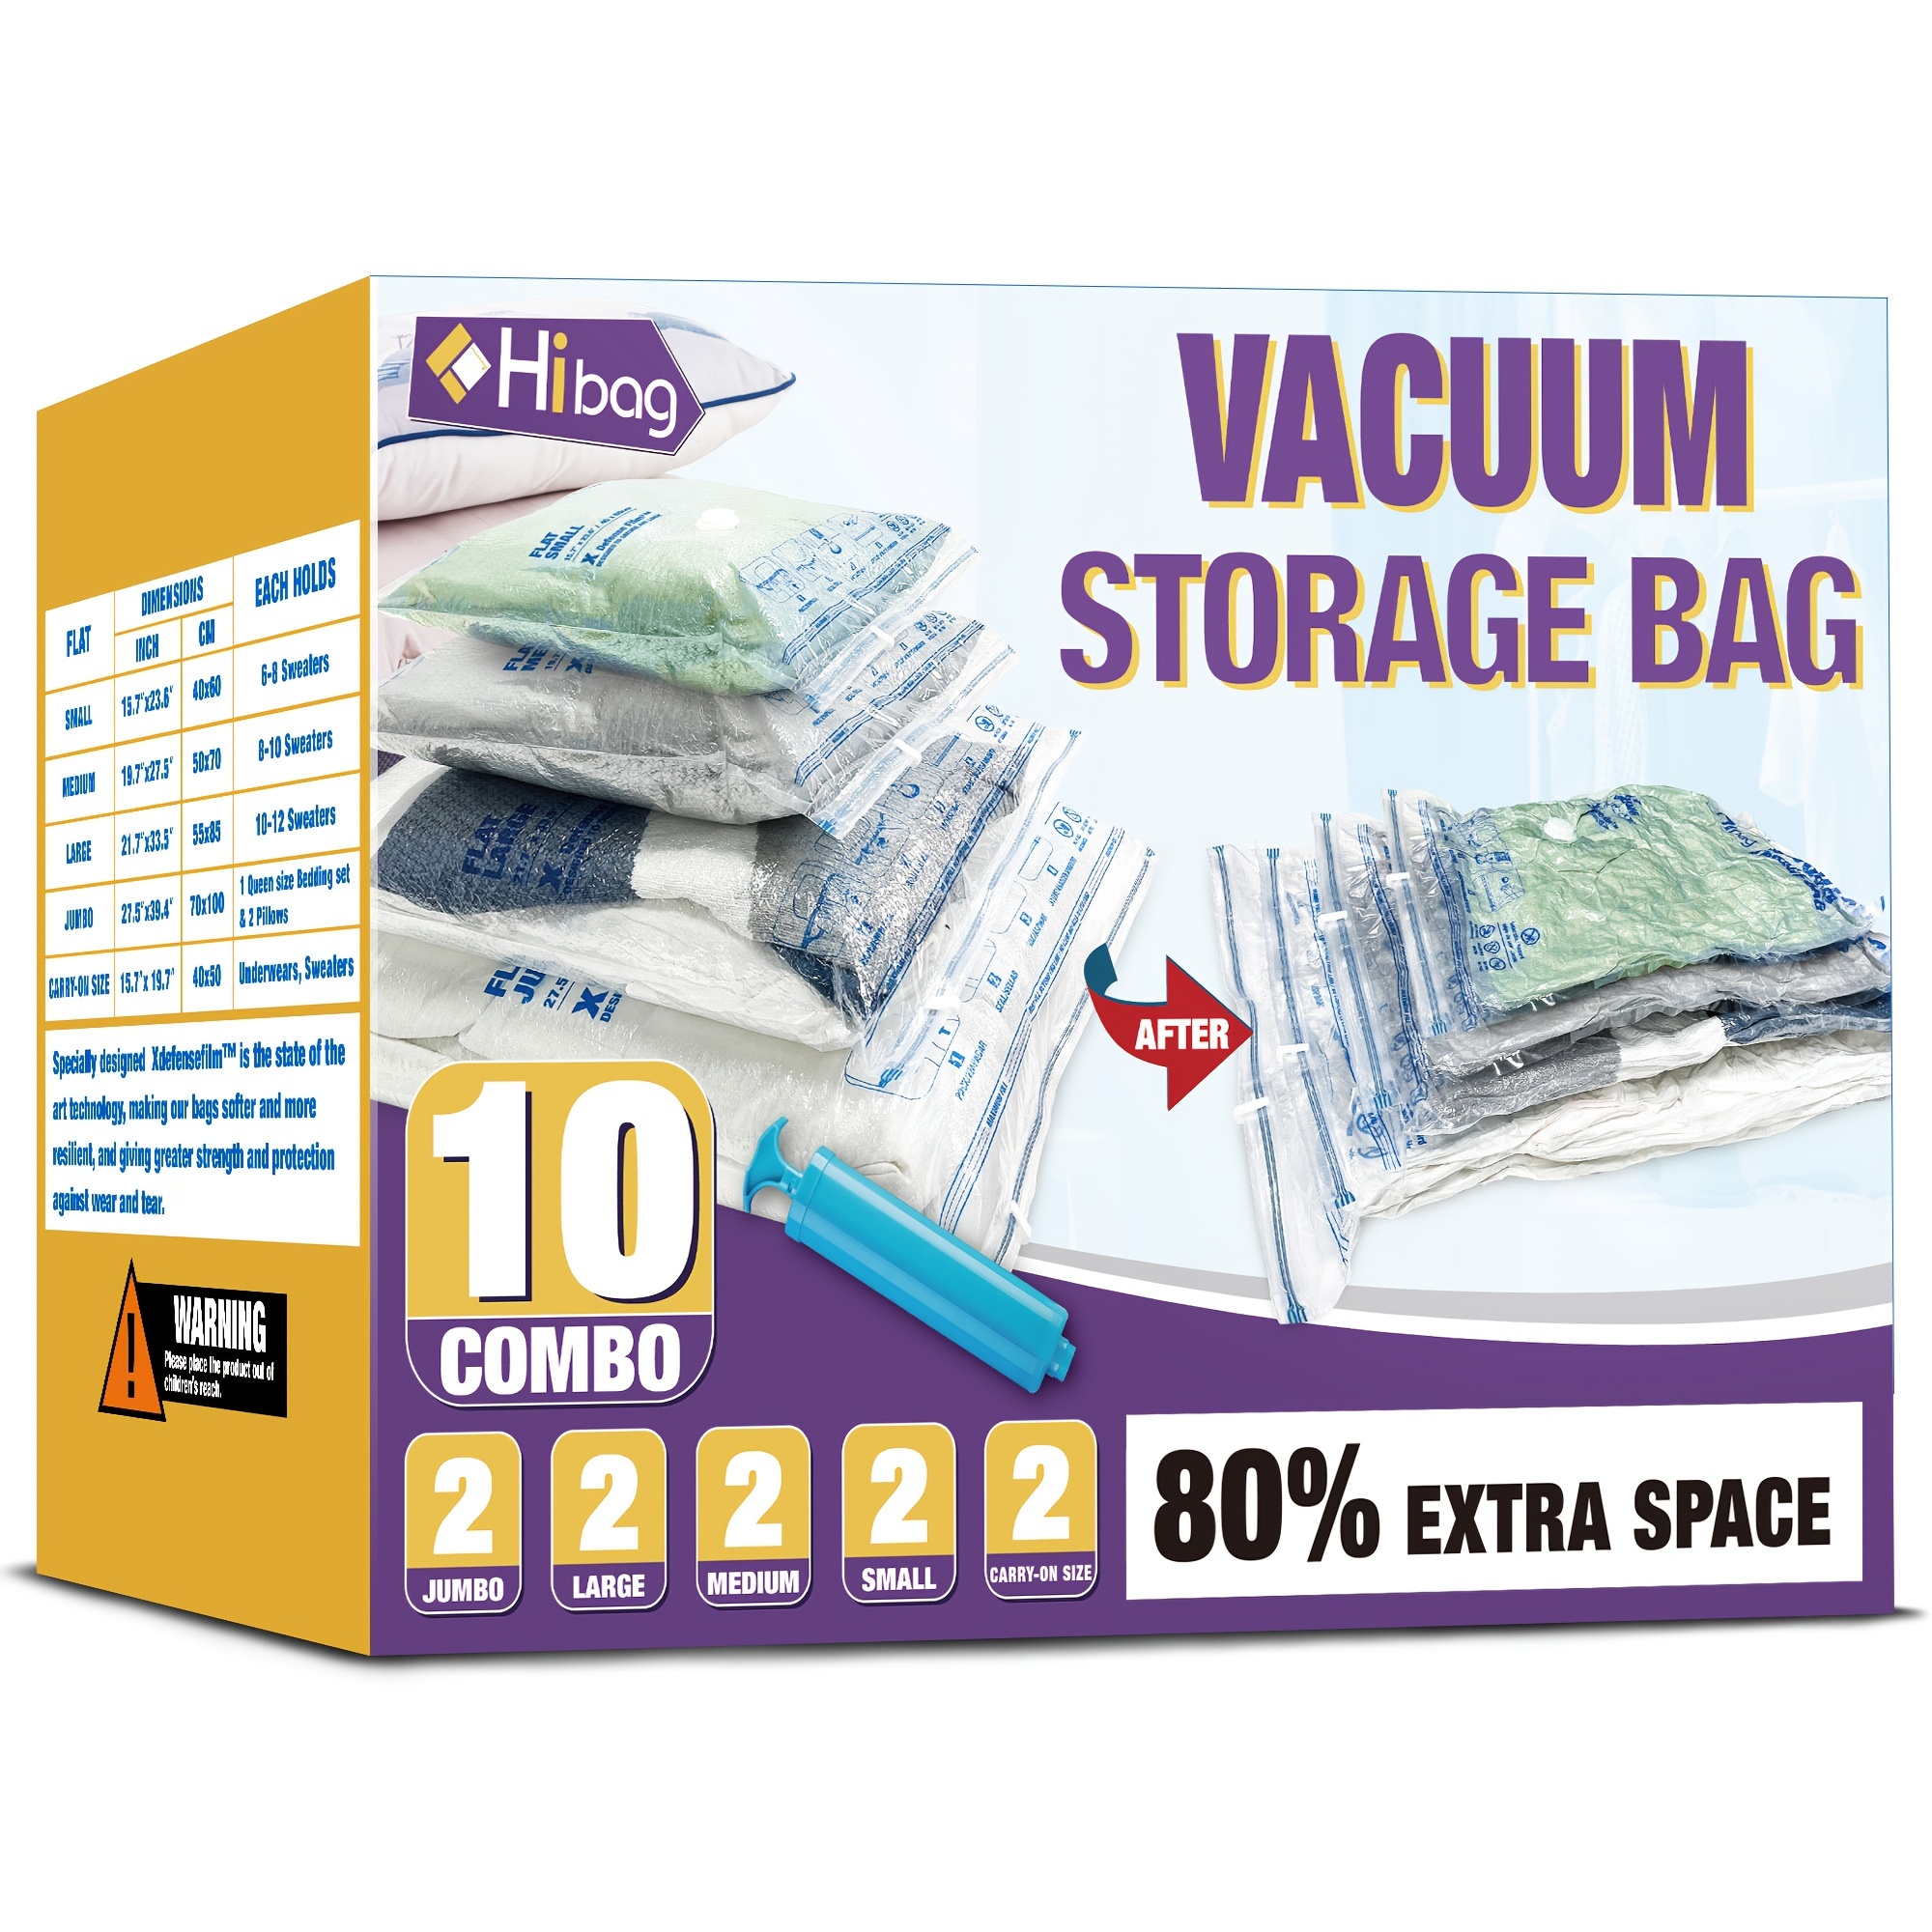 12 Pack Space Saver Bags (2 Jumbo/2 Large/2 Medium/2 Small/4 Roll)  Compression Storage Bags for Comforters and Blankets, Vacuum Sealer Bags  for